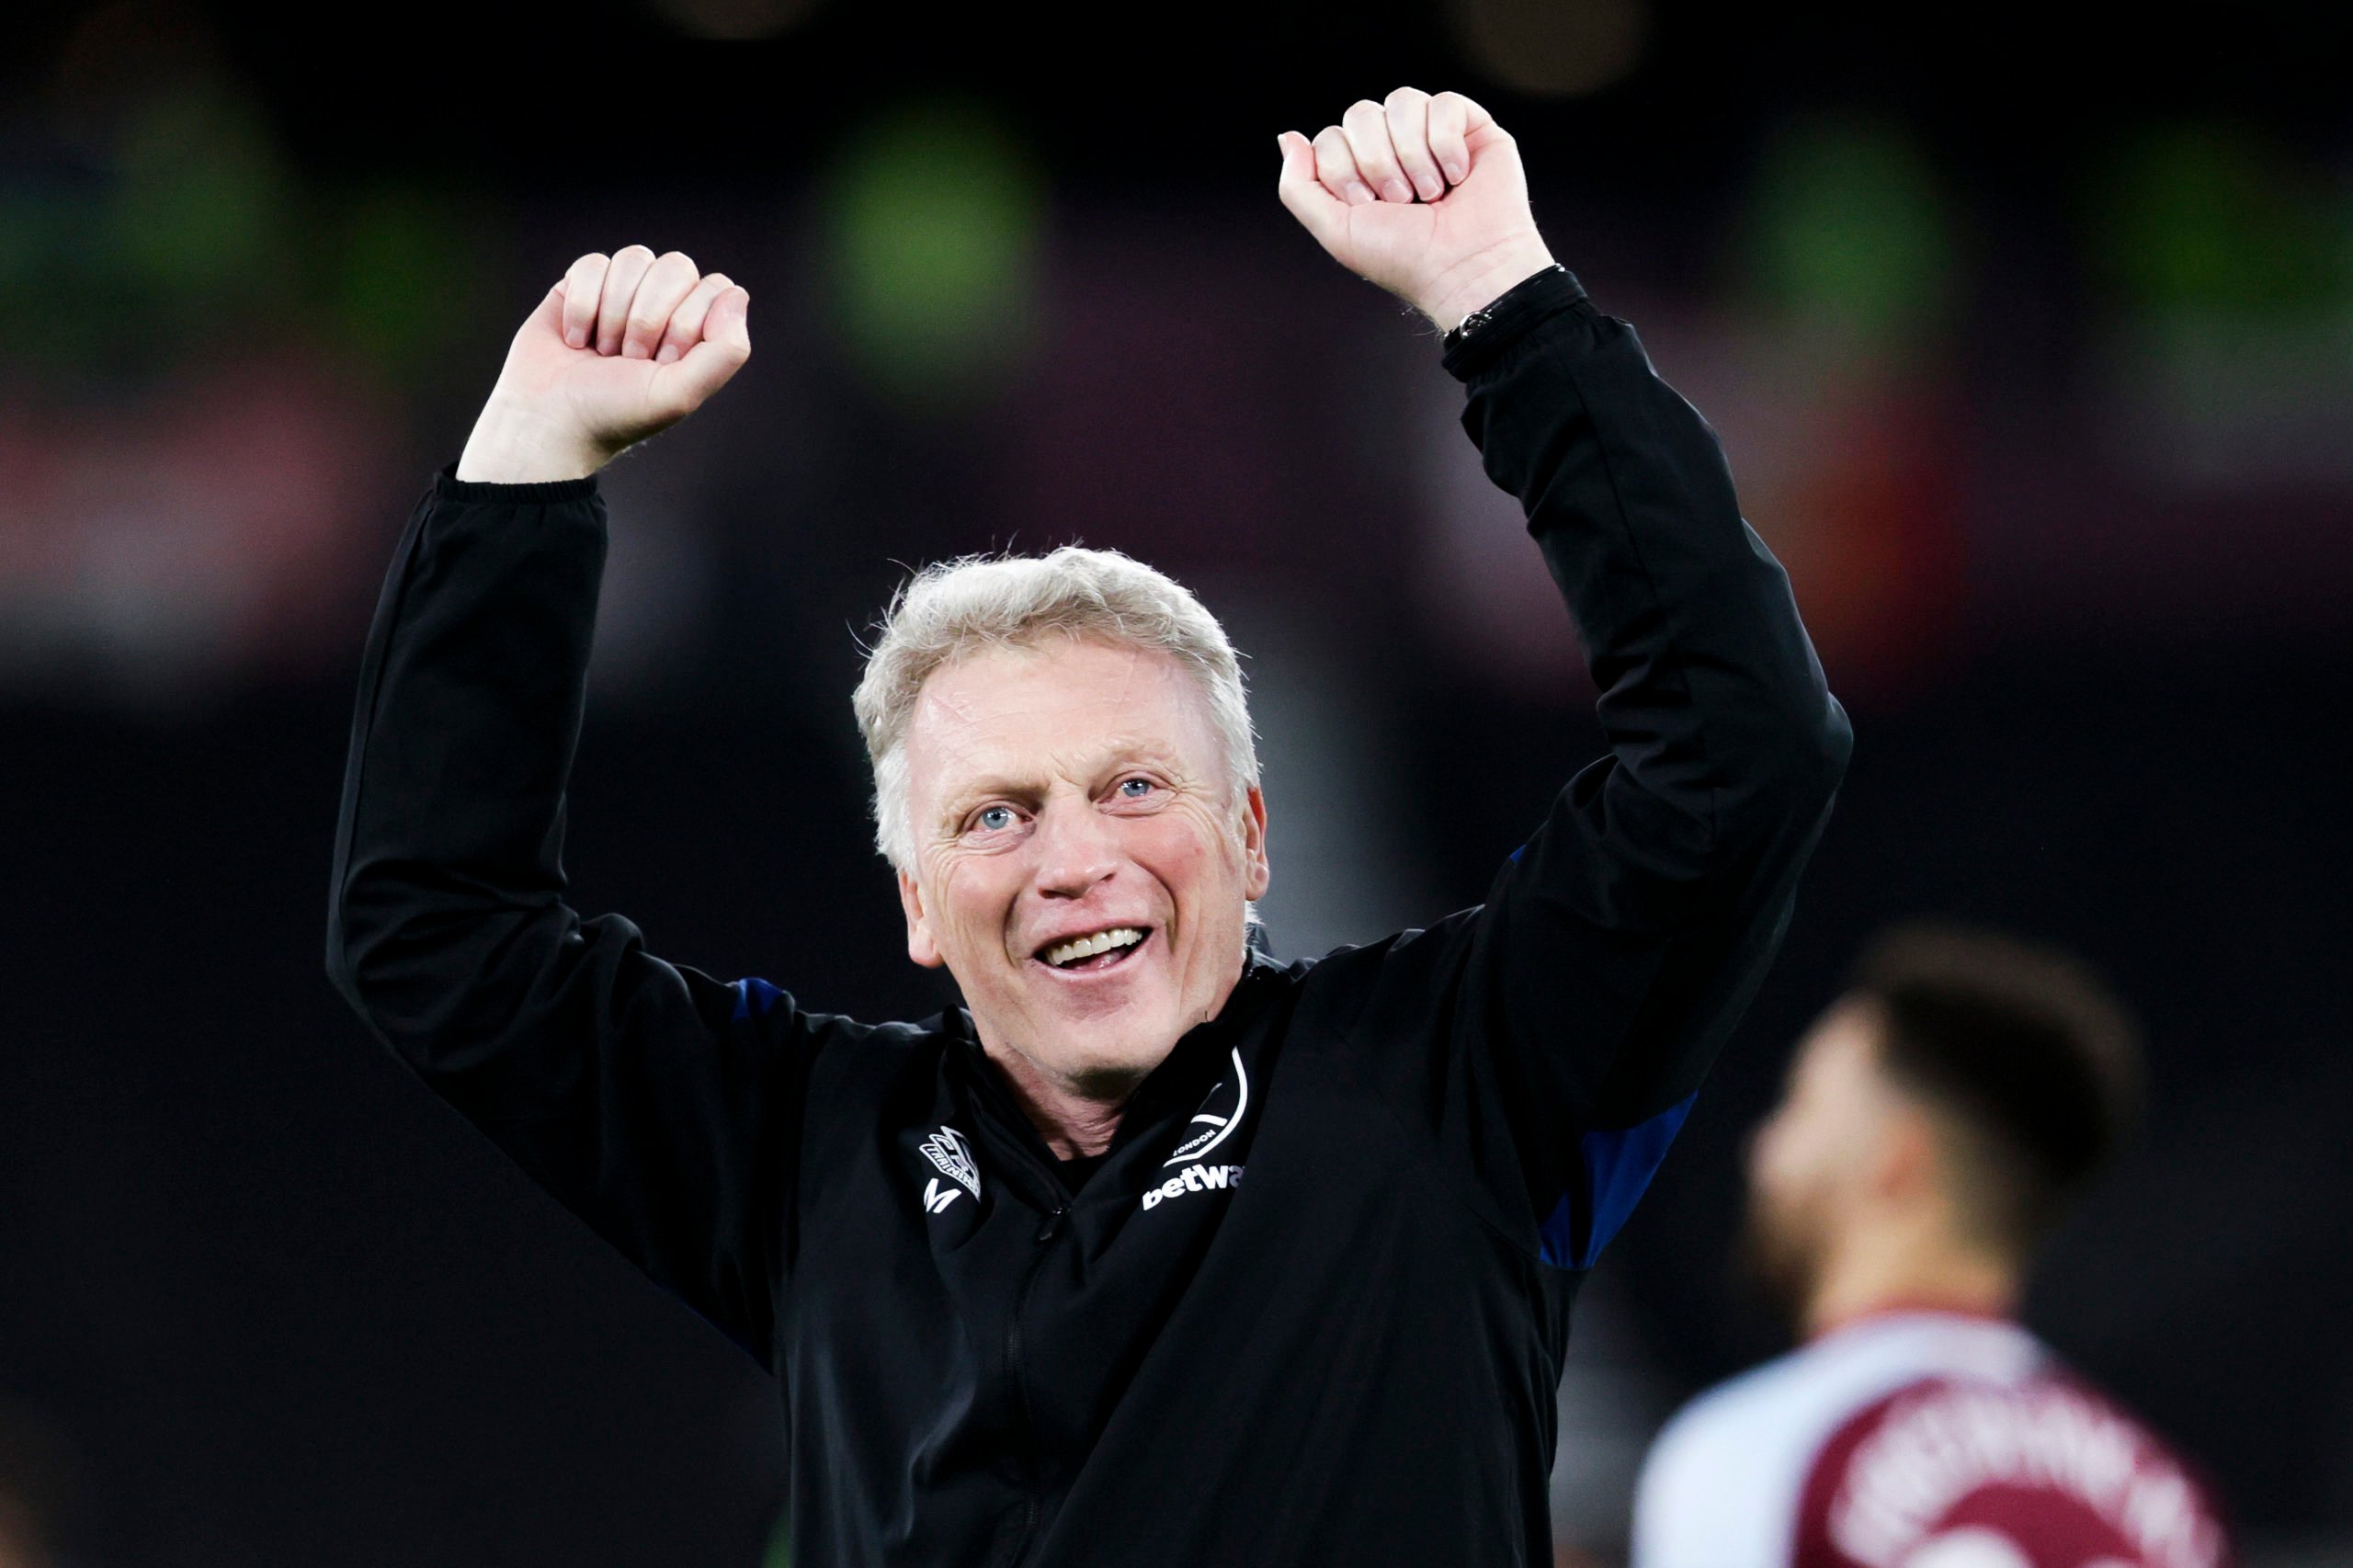 David Moyes could drop two key players for West Ham vs Everton clash, insider claims